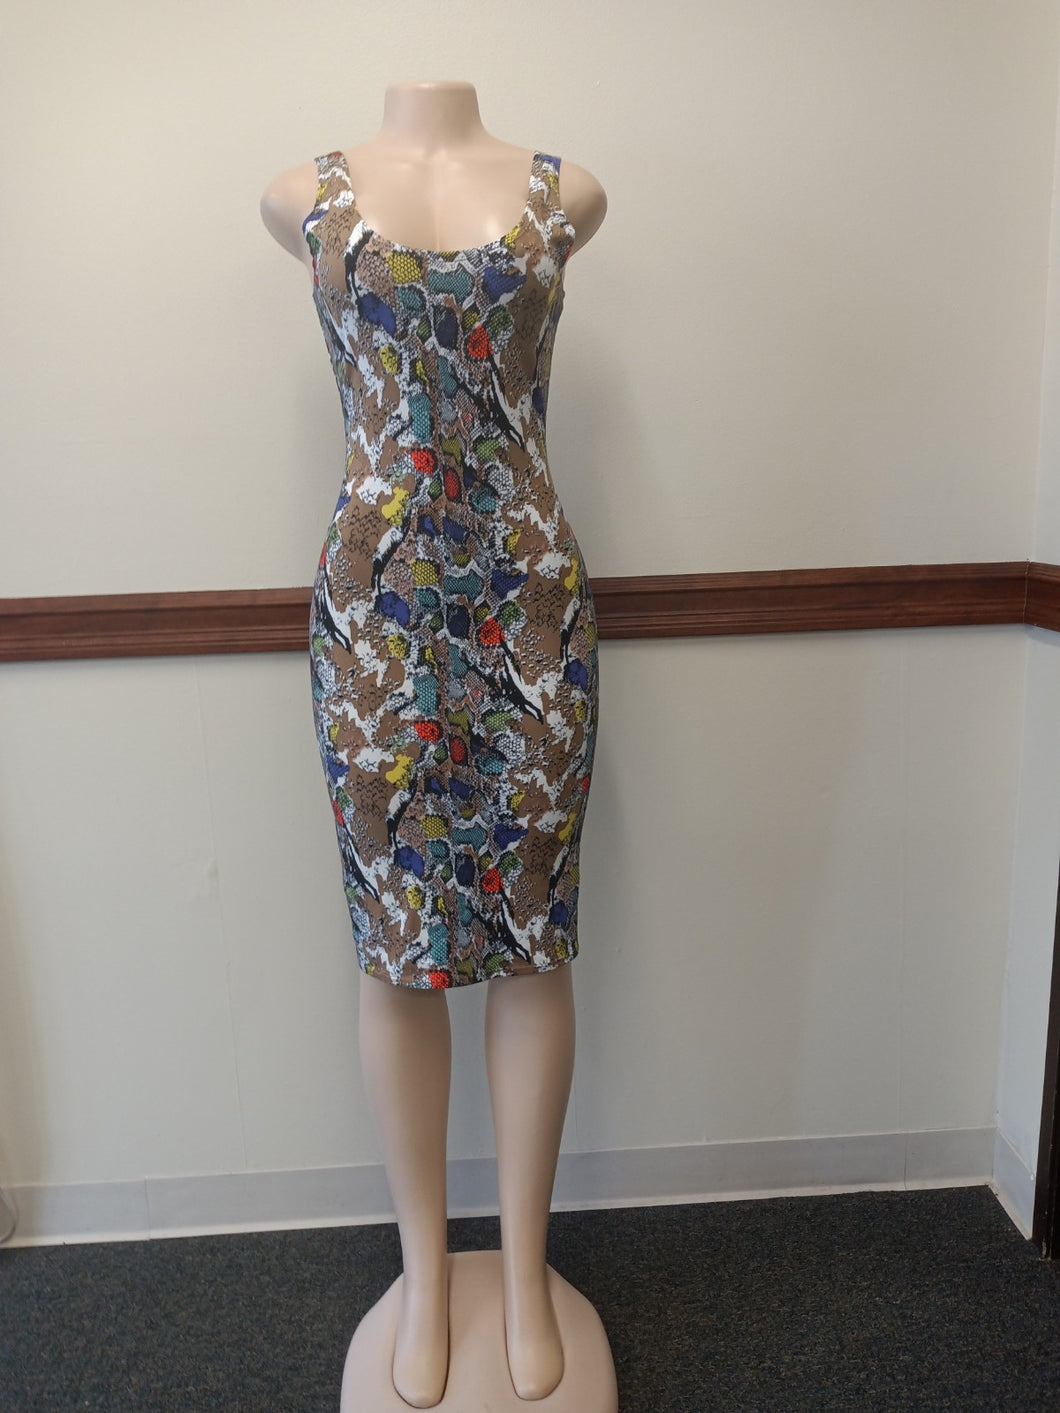 Snake Print Casual Tank Dress Available in Size M LOTS OF STRETCH